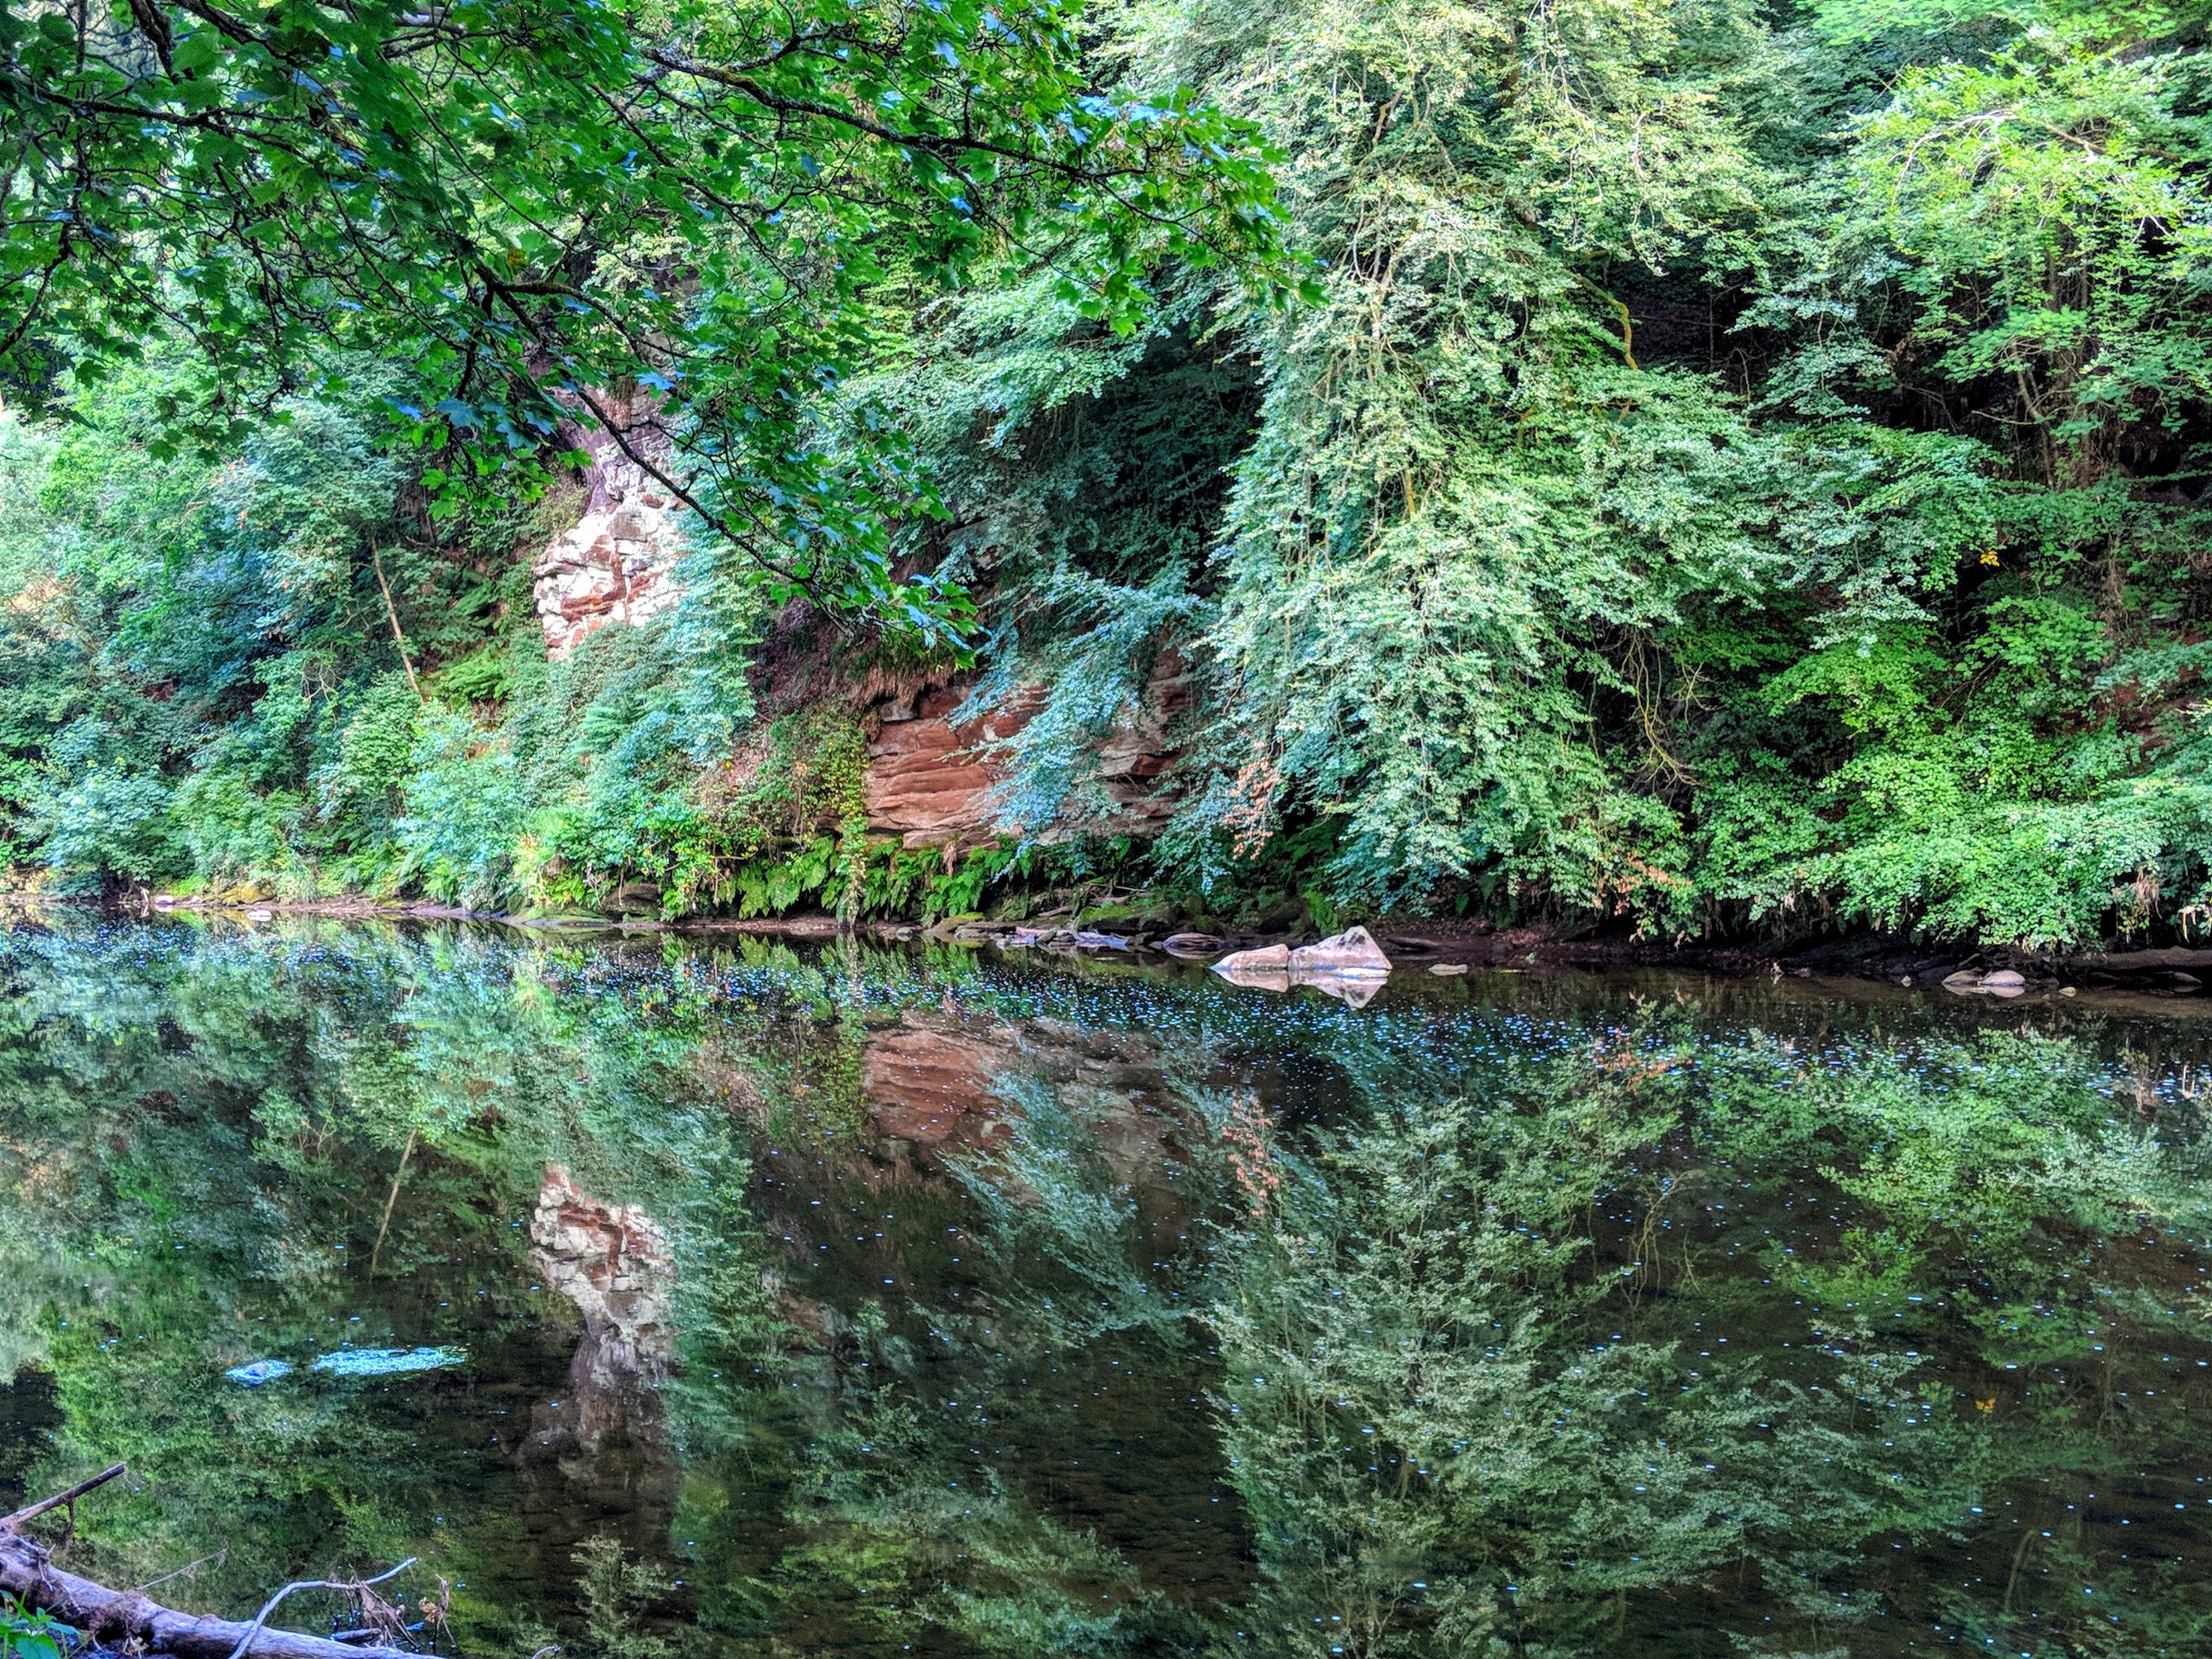 Reflections of trees and red sandstone gorge into the River Ayr